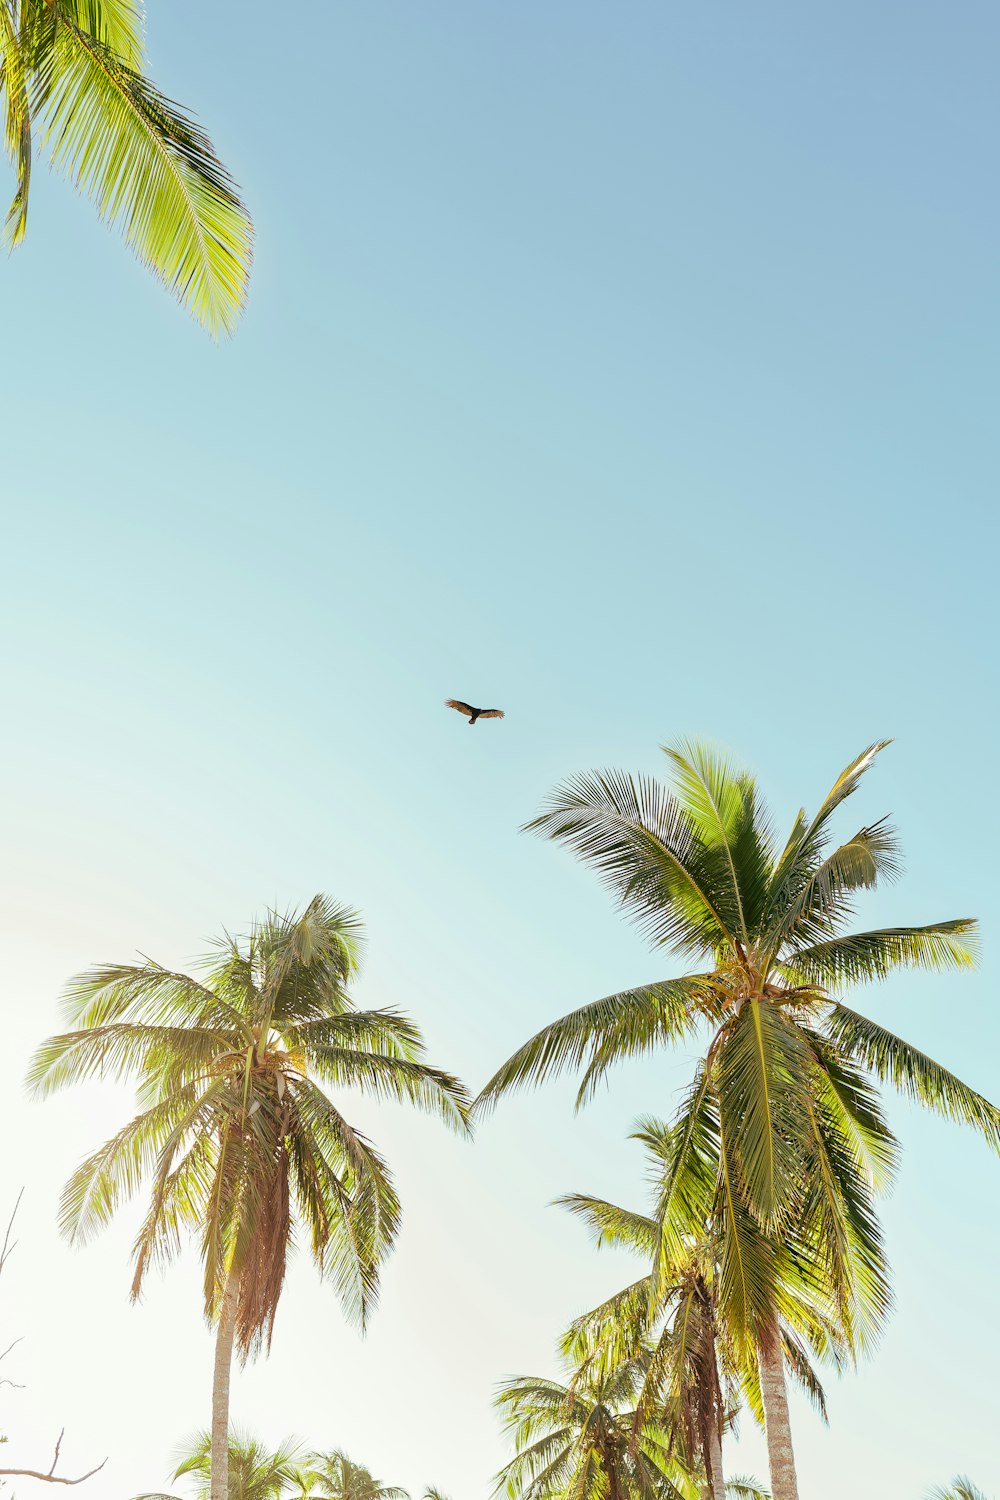 a bird flying over some palm trees under a blue sky